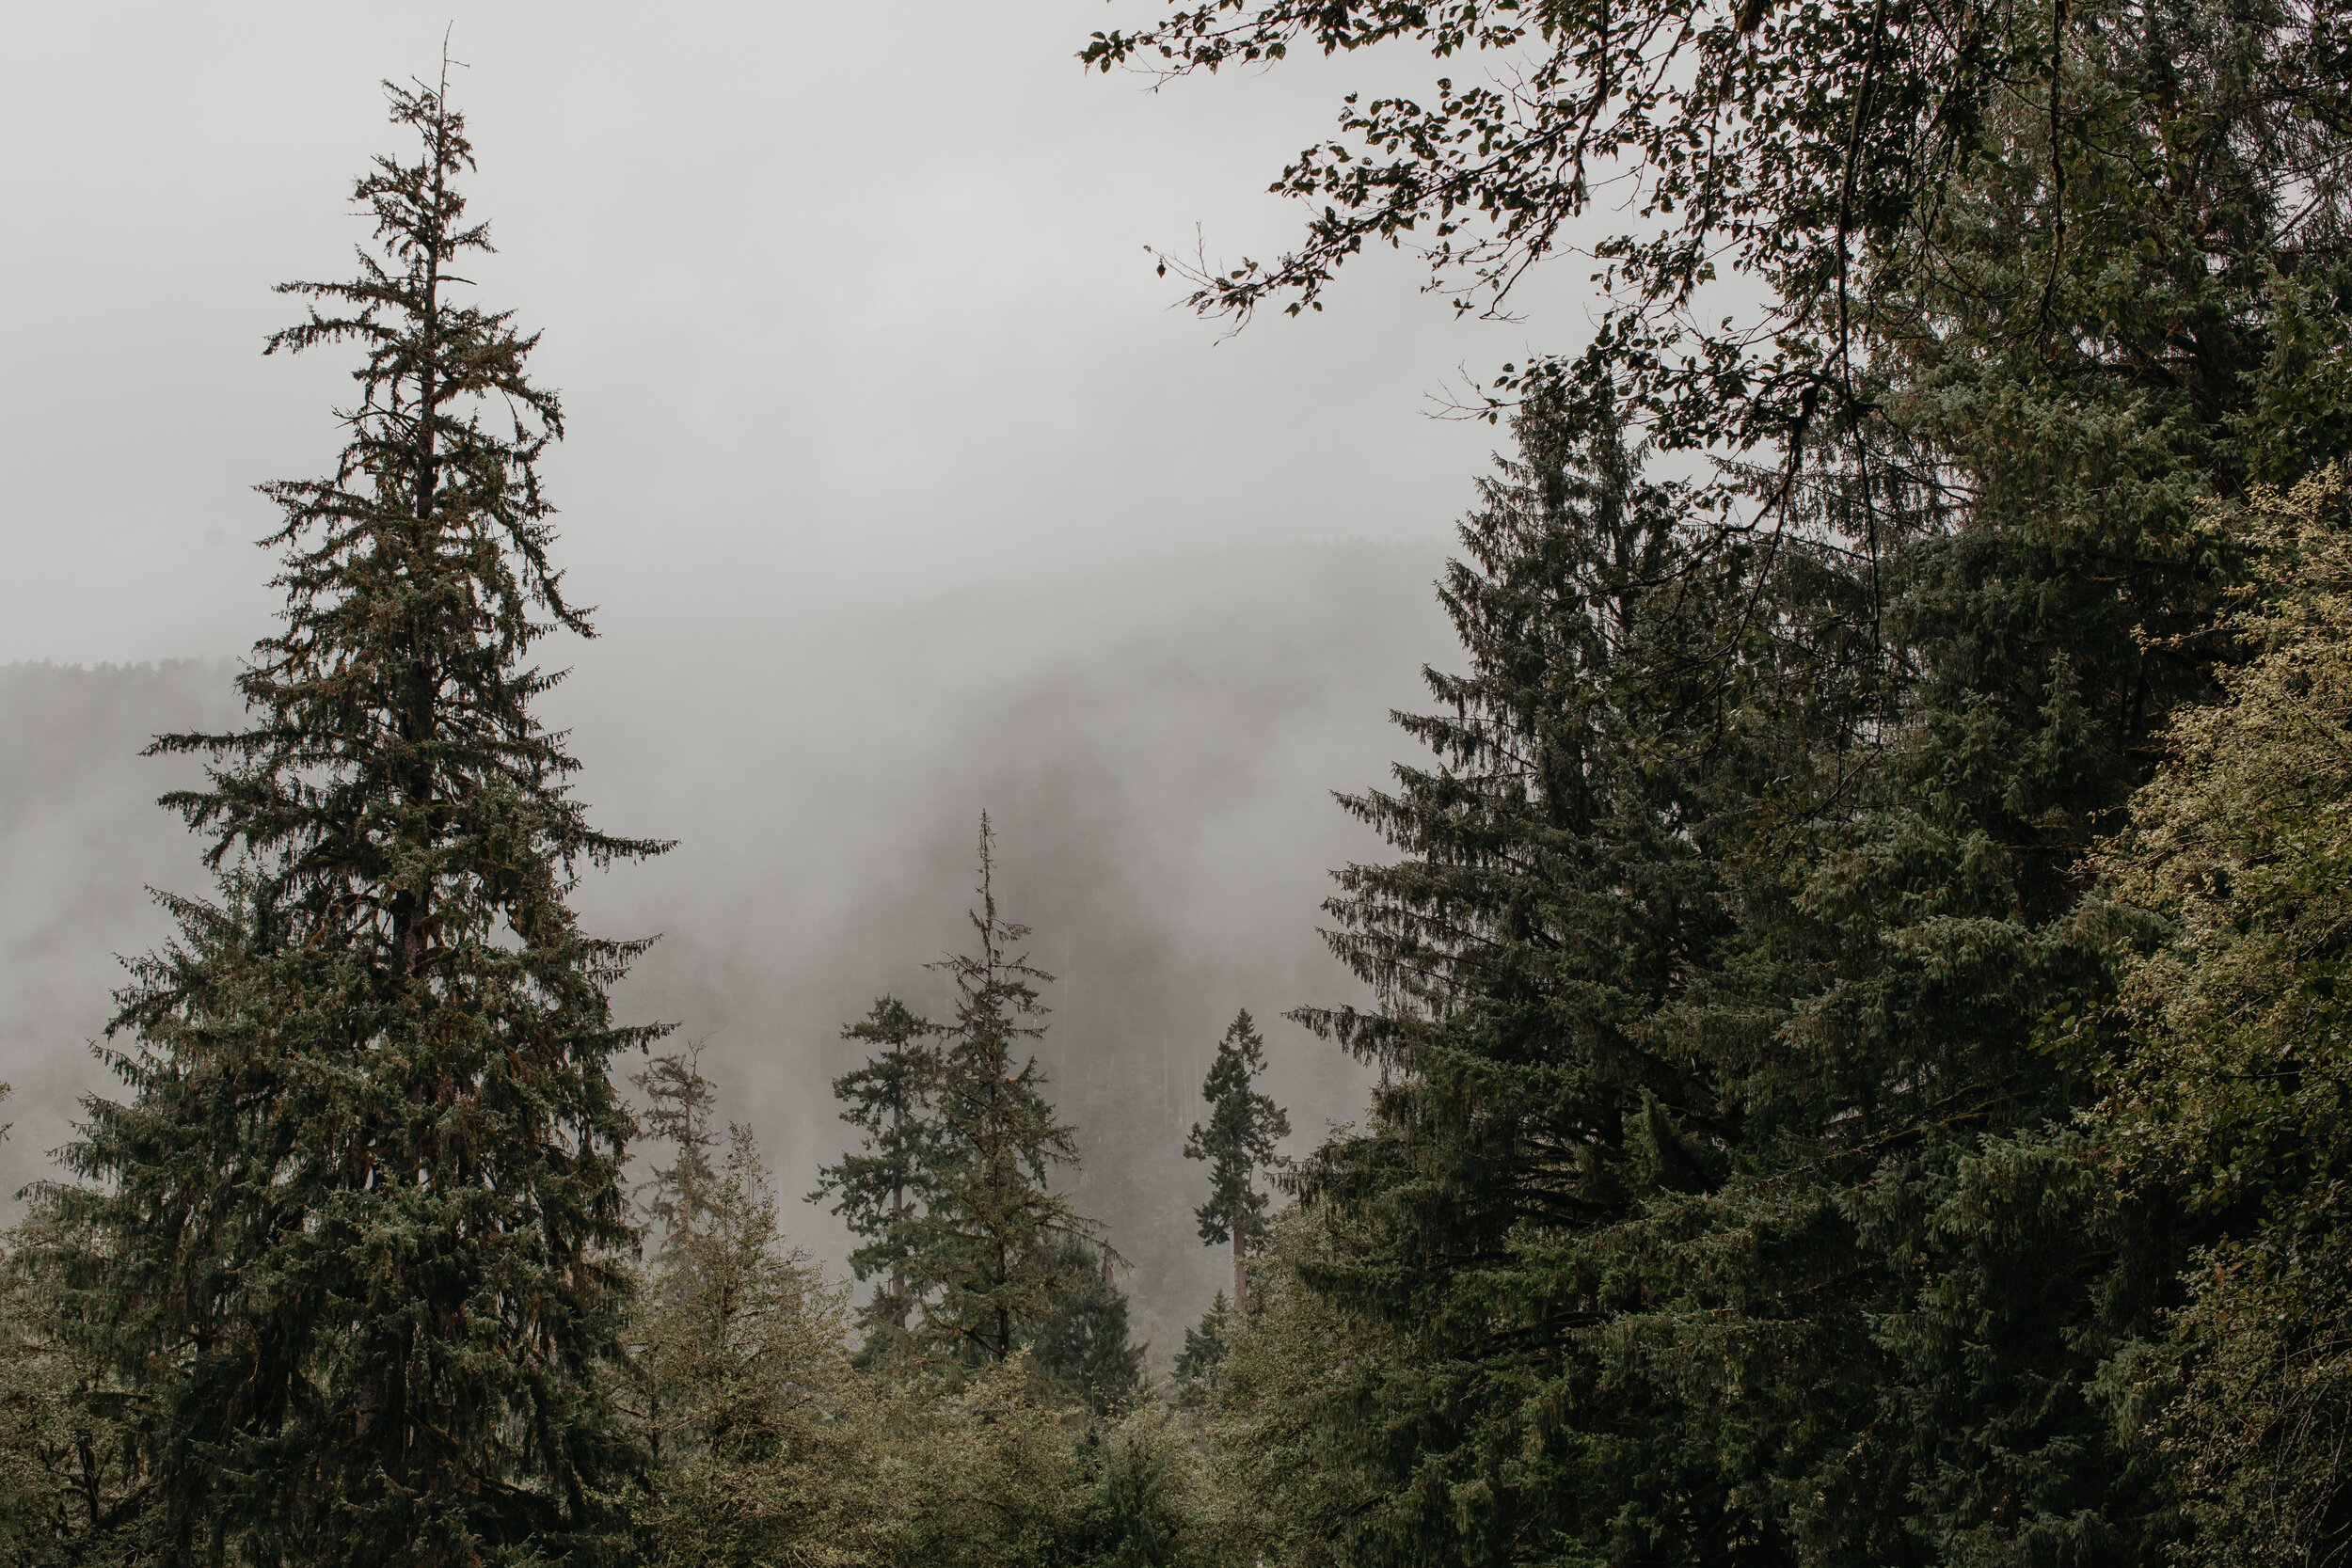 Nicole-Daacke-Photography-Olympic-national-park-elopement-photography-intimiate-elopement-in-olympic-peninsula-washington-state-rainy-day-ruby-beach-hoh-rainforest-elopement-inspiration-rainforest-pnw-elopement-photography-100.jpg